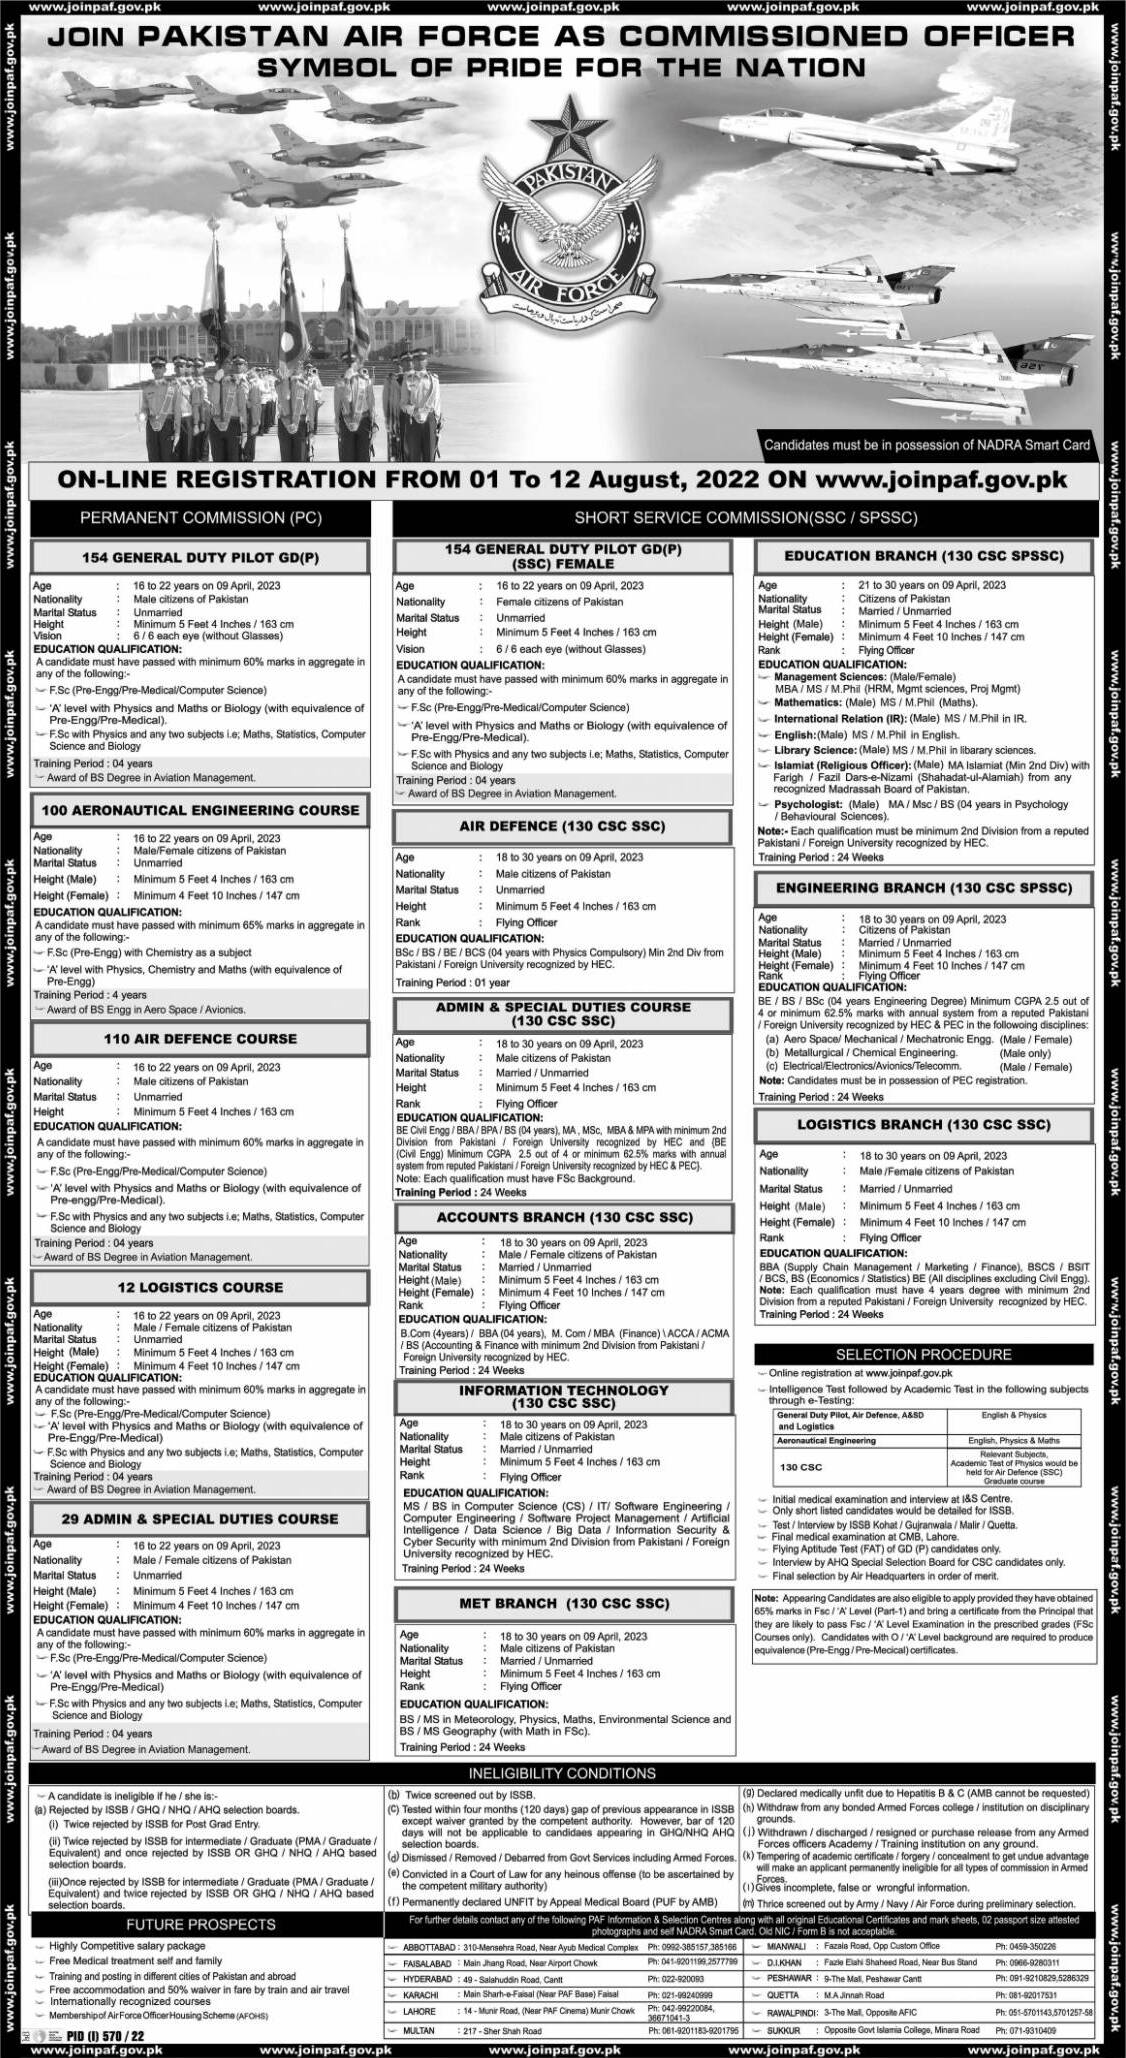 JOIN PAKISTAN AIR FORCE AS COMMISSIONED OFFICERS JOBS 2022